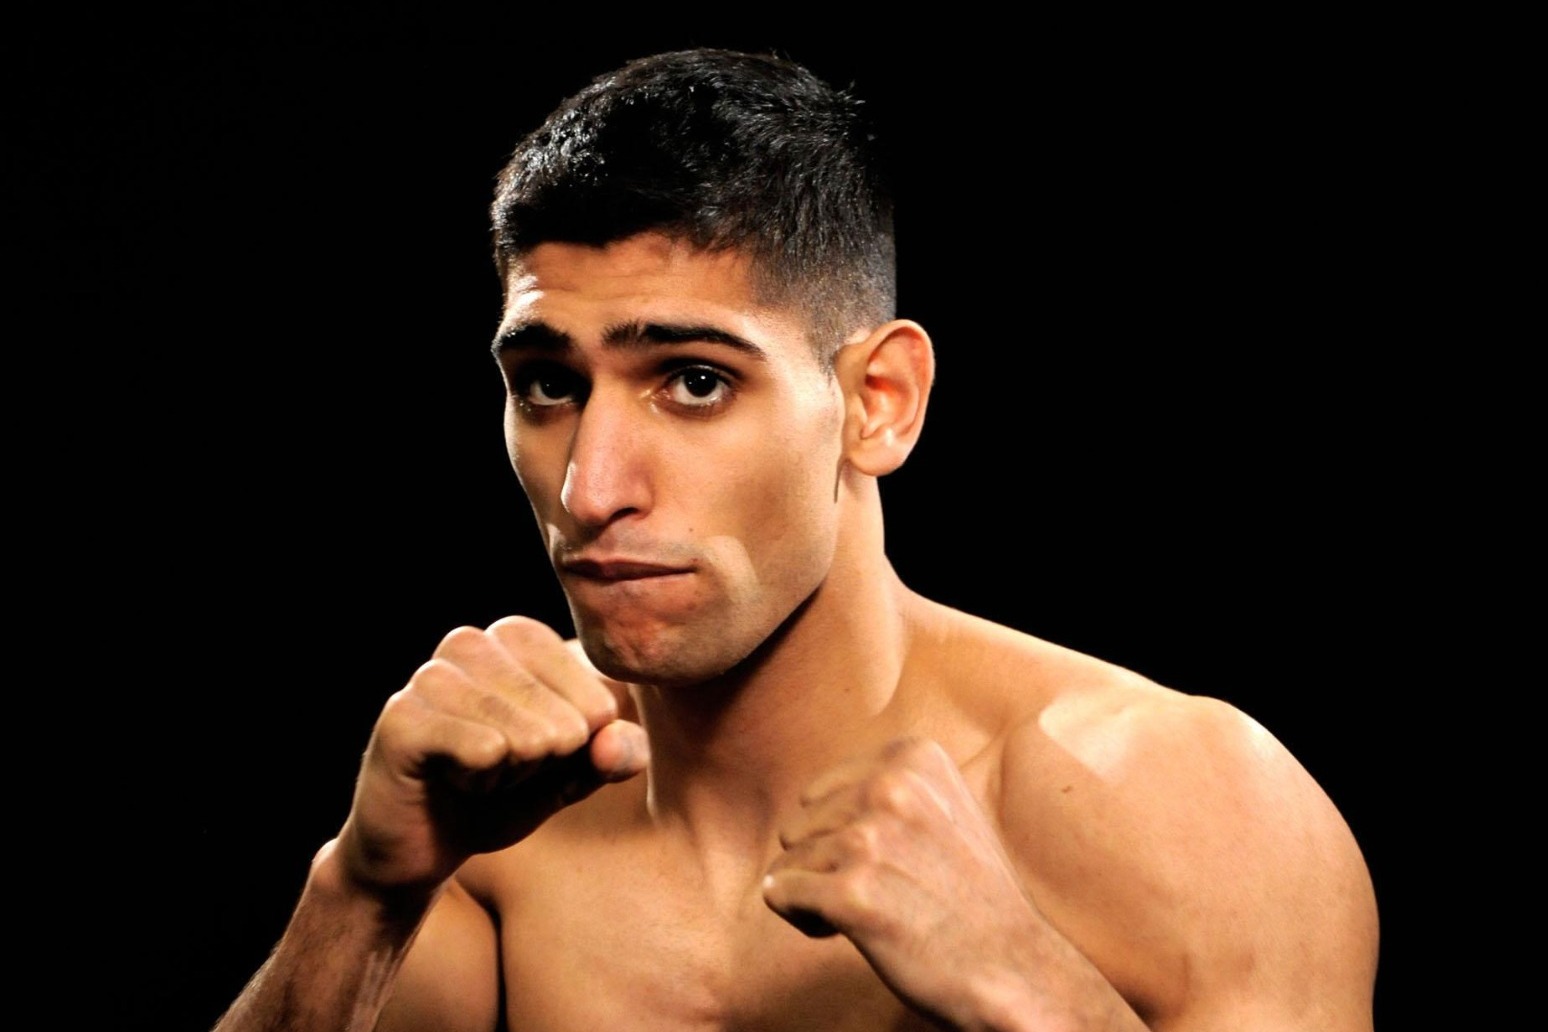 Fourth man charged after boxer Amir Khan ‘robbed at gunpoint for £72,000 watch’ 